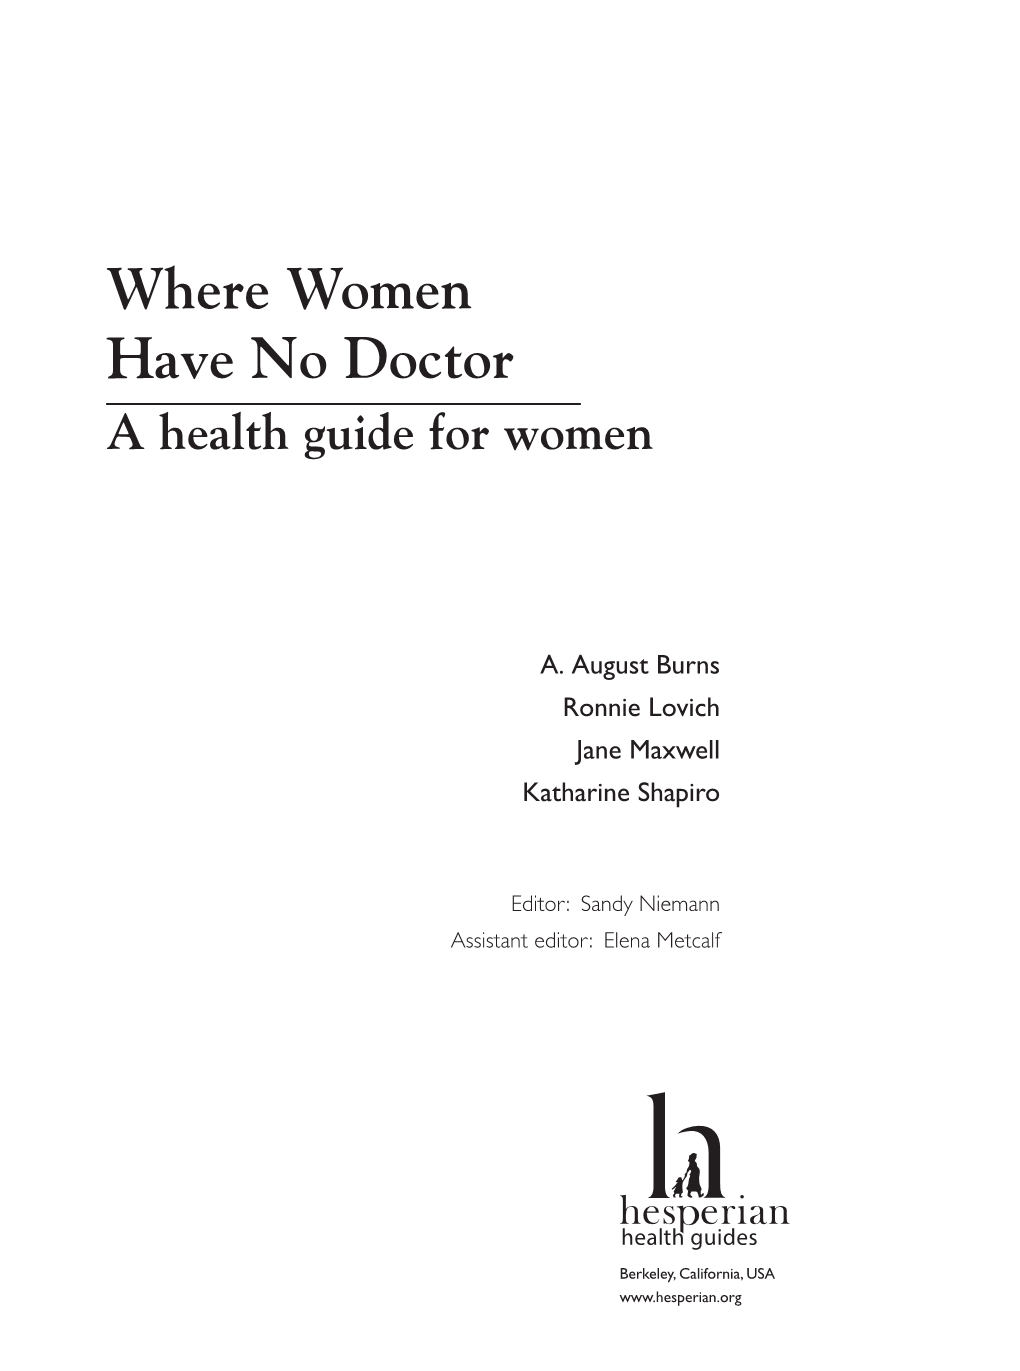 Where Women Have No Doctor a Health Guide for Women